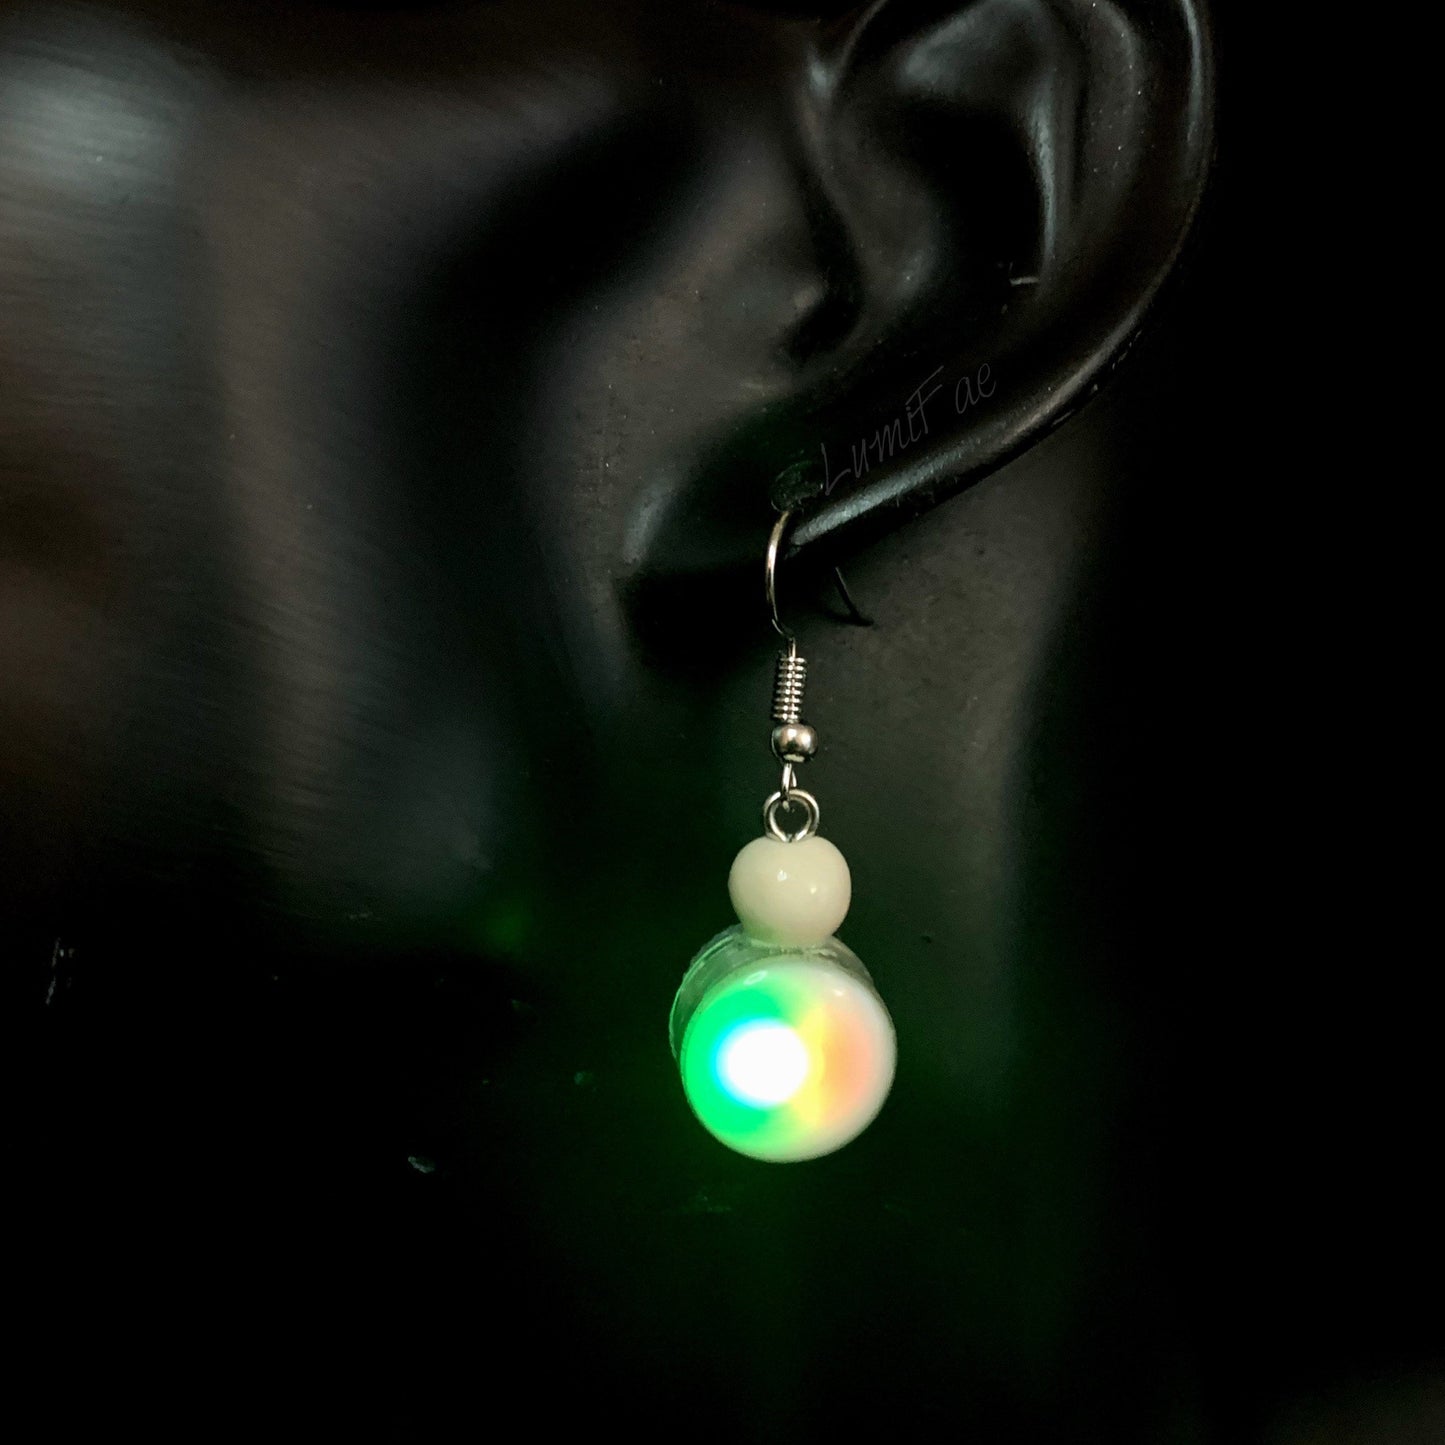 Color Changing LED Baubles, earrings